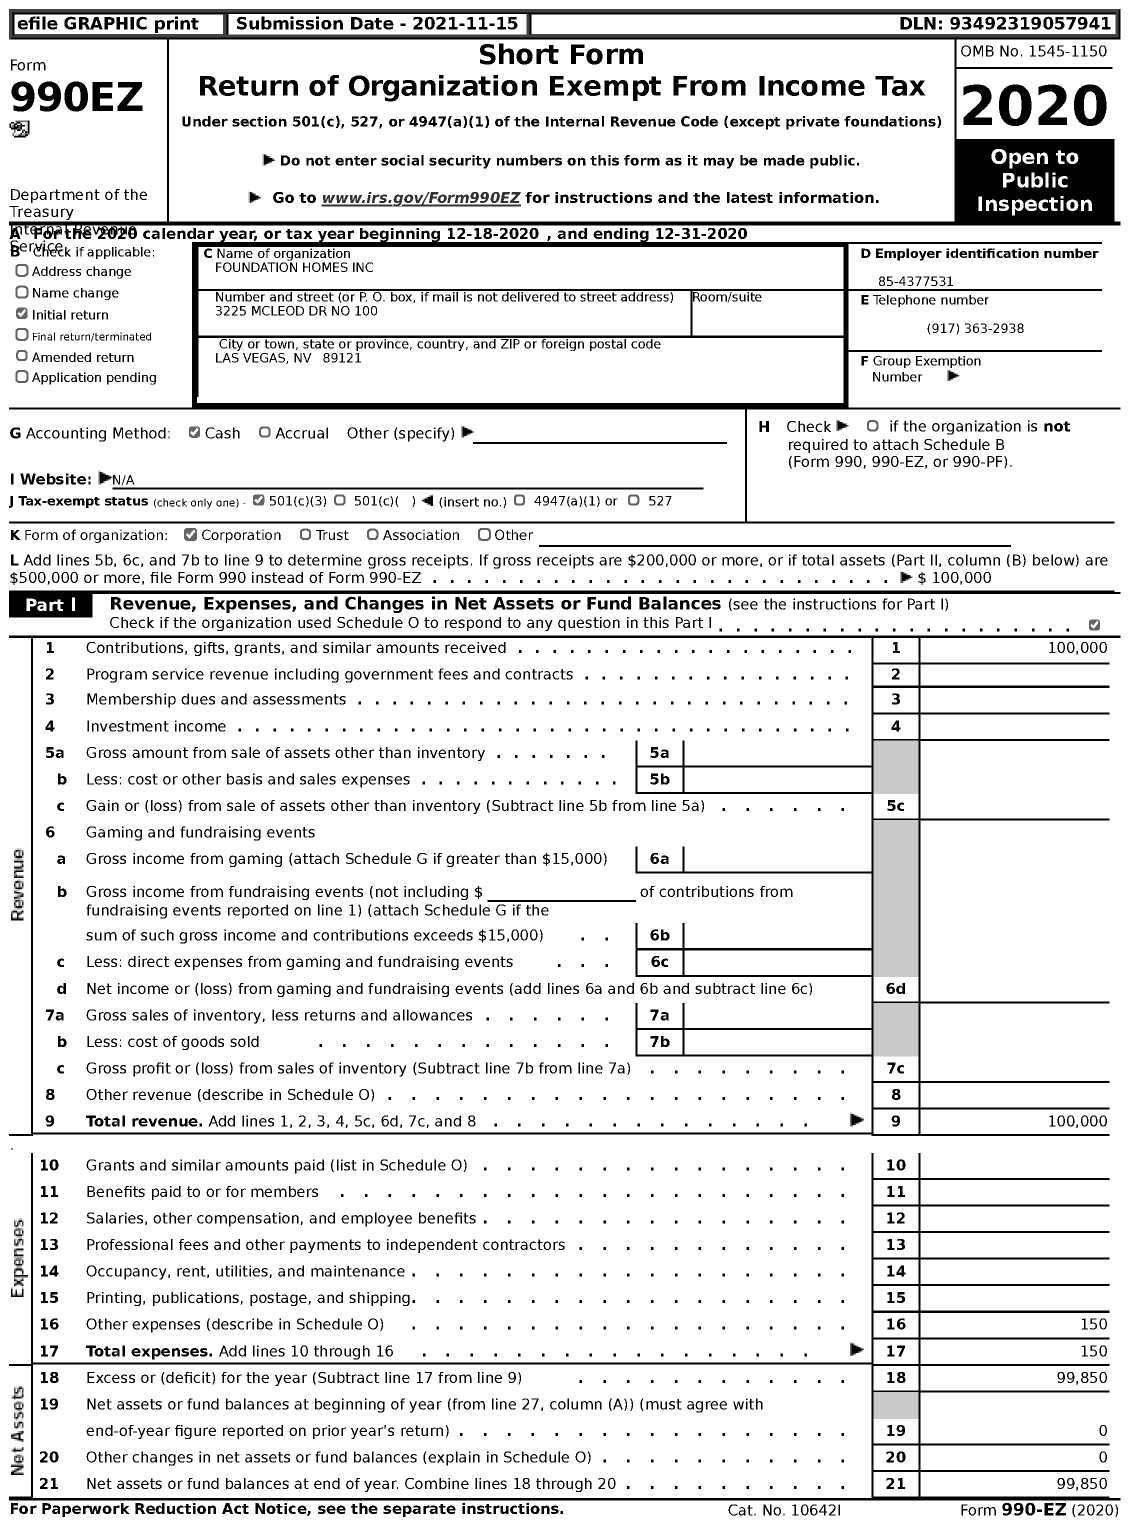 Image of first page of 2020 Form 990EZ for Foundation Homes